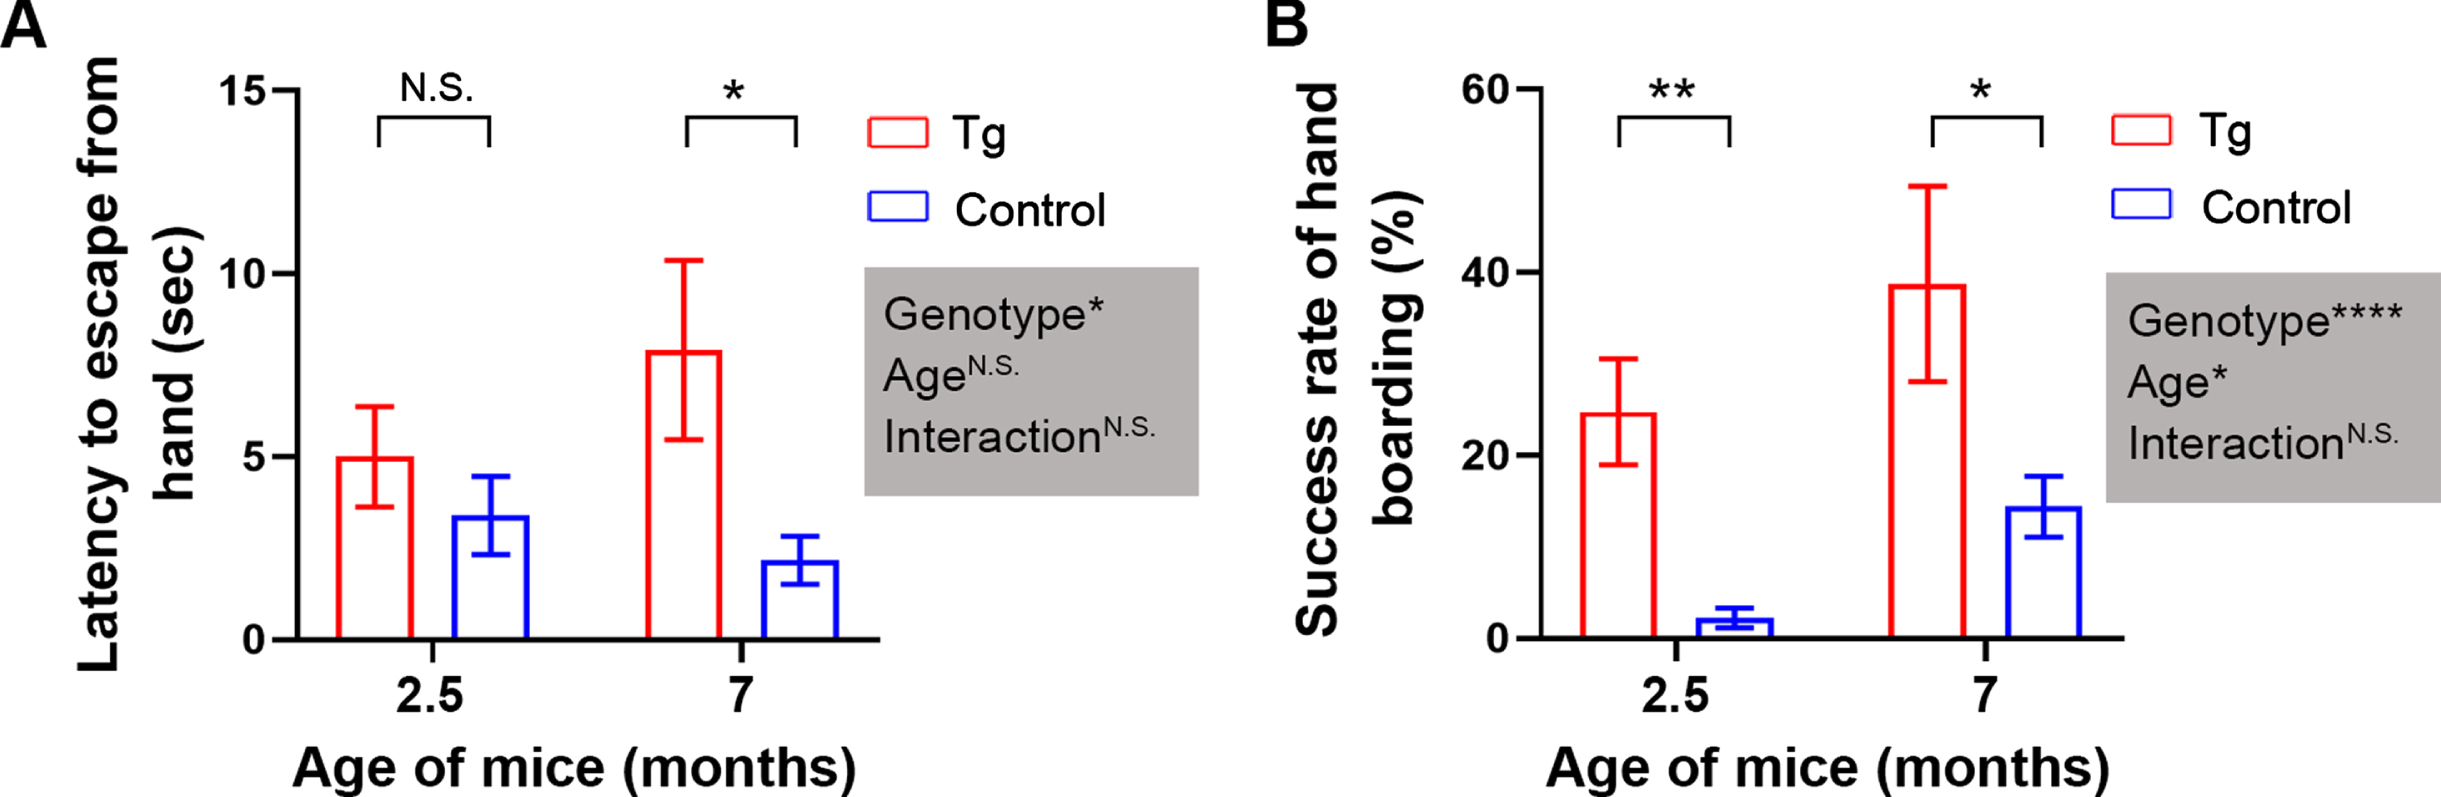 The baseline level of tameness is markedly higher in 2.5- and 7-month-old 3×Tg-AD mice than in age-matched B6;129 genetic control mice. A) Hand-staying assay. B) Hand-boarding assay. Data are expressed as mean±SEM (n = 12−23 mice/condition) and analyzed with two-way ANOVA. Shaded boxes show main factor effects and the interaction between factors. *p < 0.05, **p < 0.01, ****p < 0.0001. Tg, 3×Tg-AD; control, B6;129 genetic control to 3×Tg-AD; N.S., non-significant. These abbreviations also apply to the other figures unless otherwise specified.